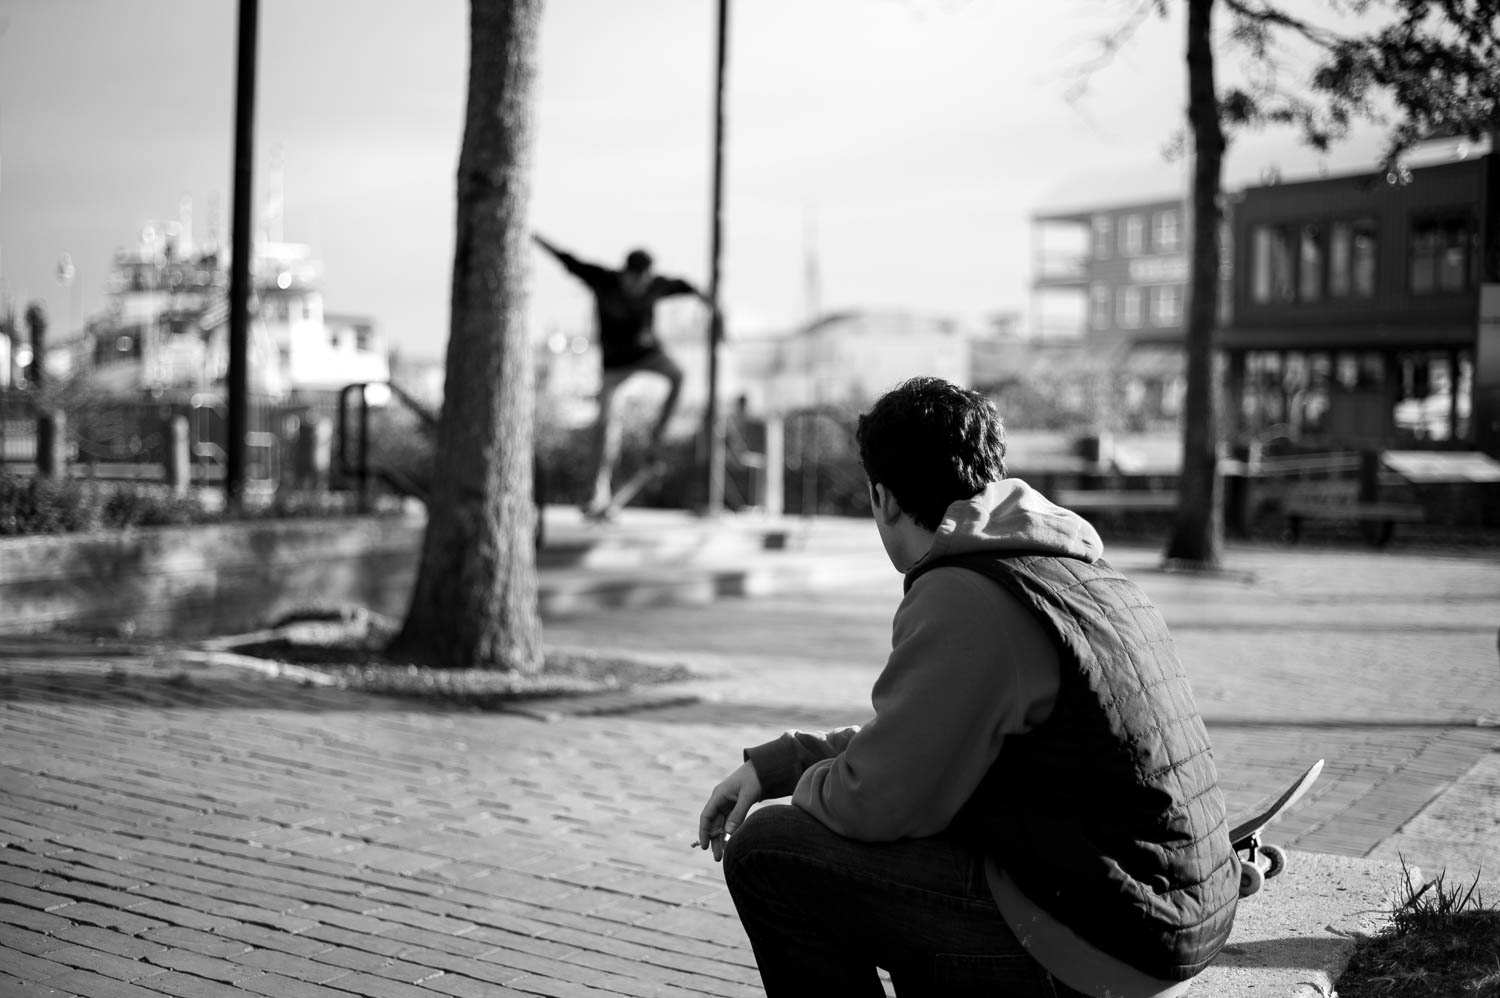 A skateboarder smoking a cigarette with his friend skateboarding in the background behind him